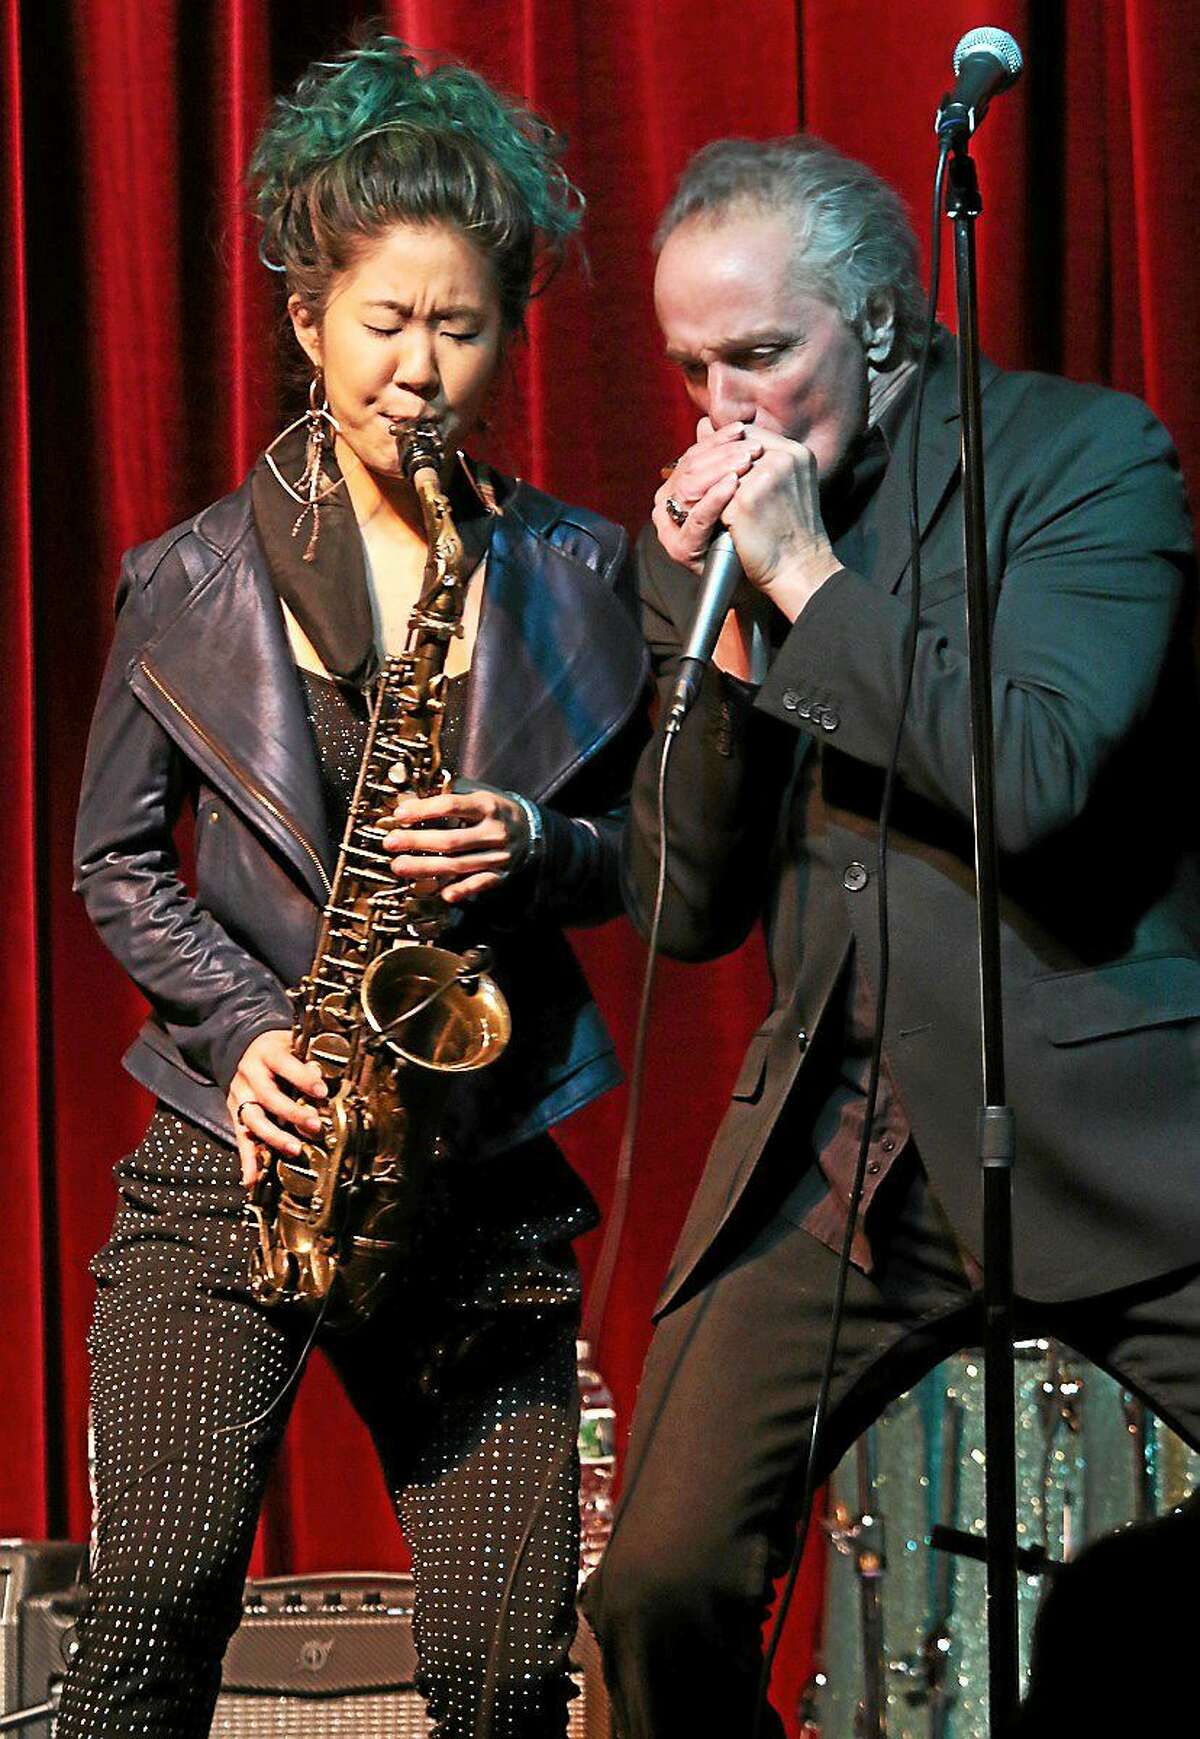 Photo by John Atashian Saxophonist Grace Kelly is shown jamming with harmonica player and band leader James Montgomery during a live concert appearance at Bridge Street Live in Collinsville on Dec. 18. Kelly became the youngest ever musician voted to the ìDown Beatî Magazineís Critics Poll at age 16. At 18, she released her sixth album, ìMan With the Hat,î a collaboration with jazz legend Phil Woods.